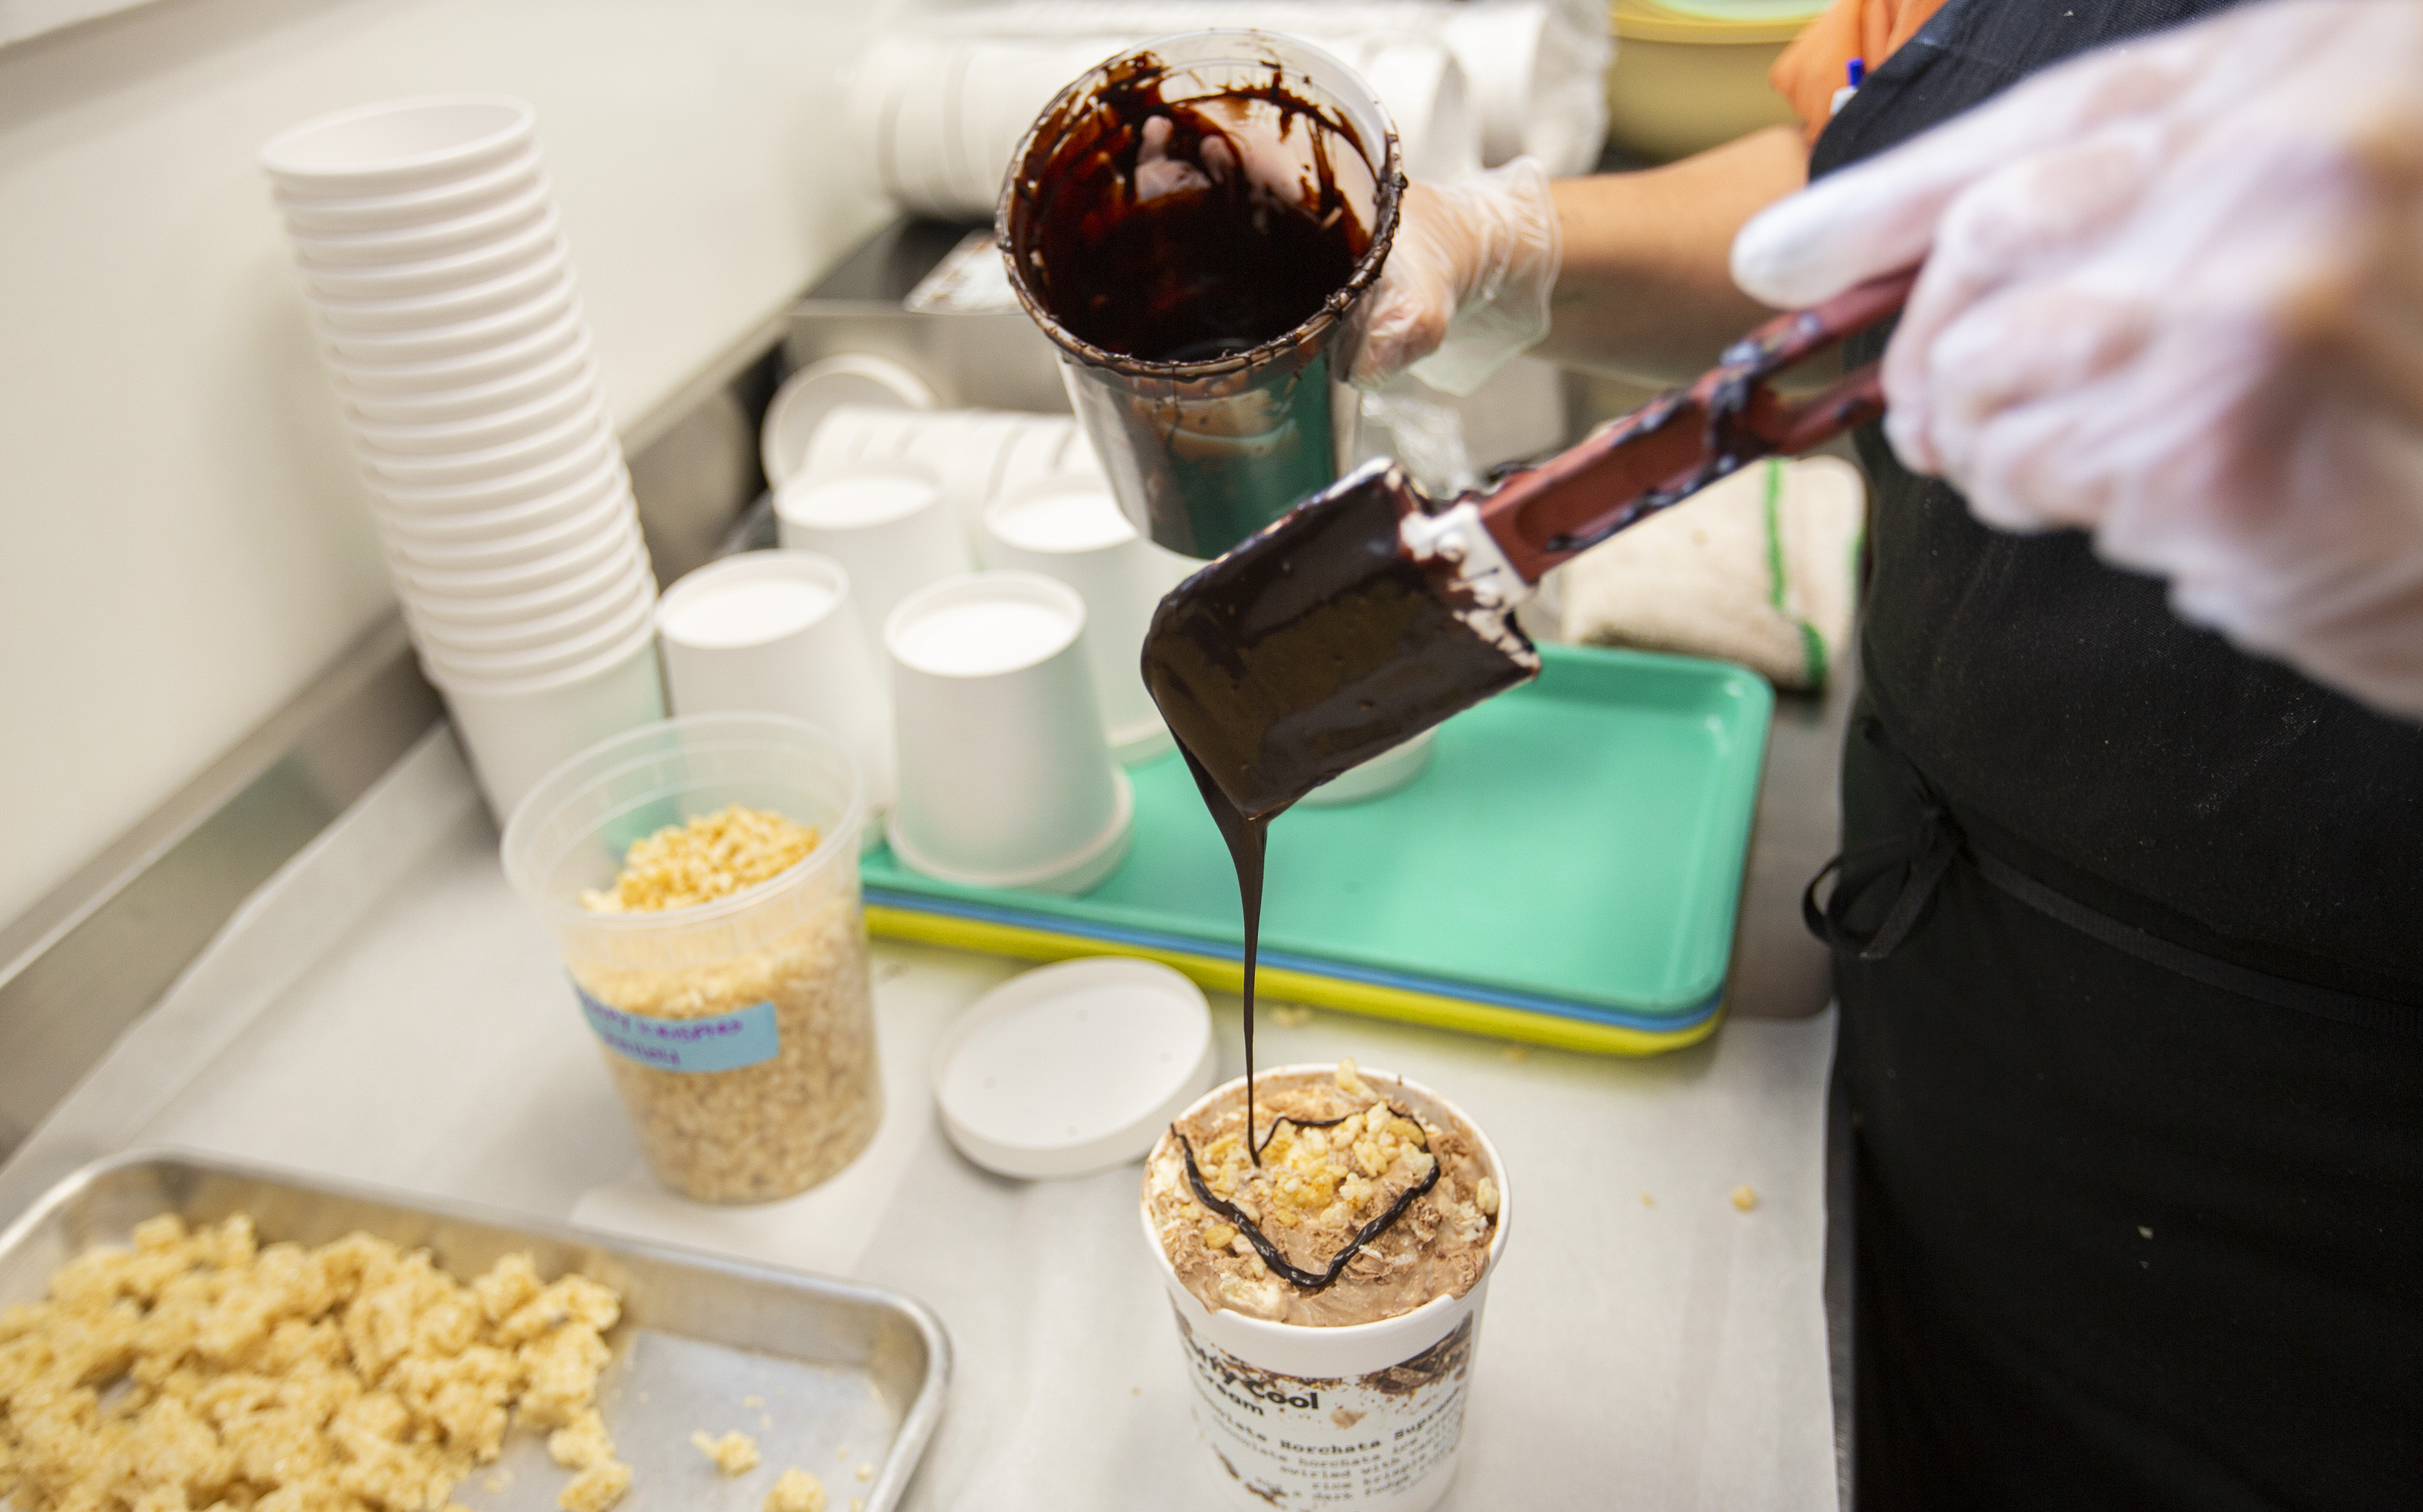 A person wearing latex gloves drizzles chocolate over a pint of ice cream in a white container.